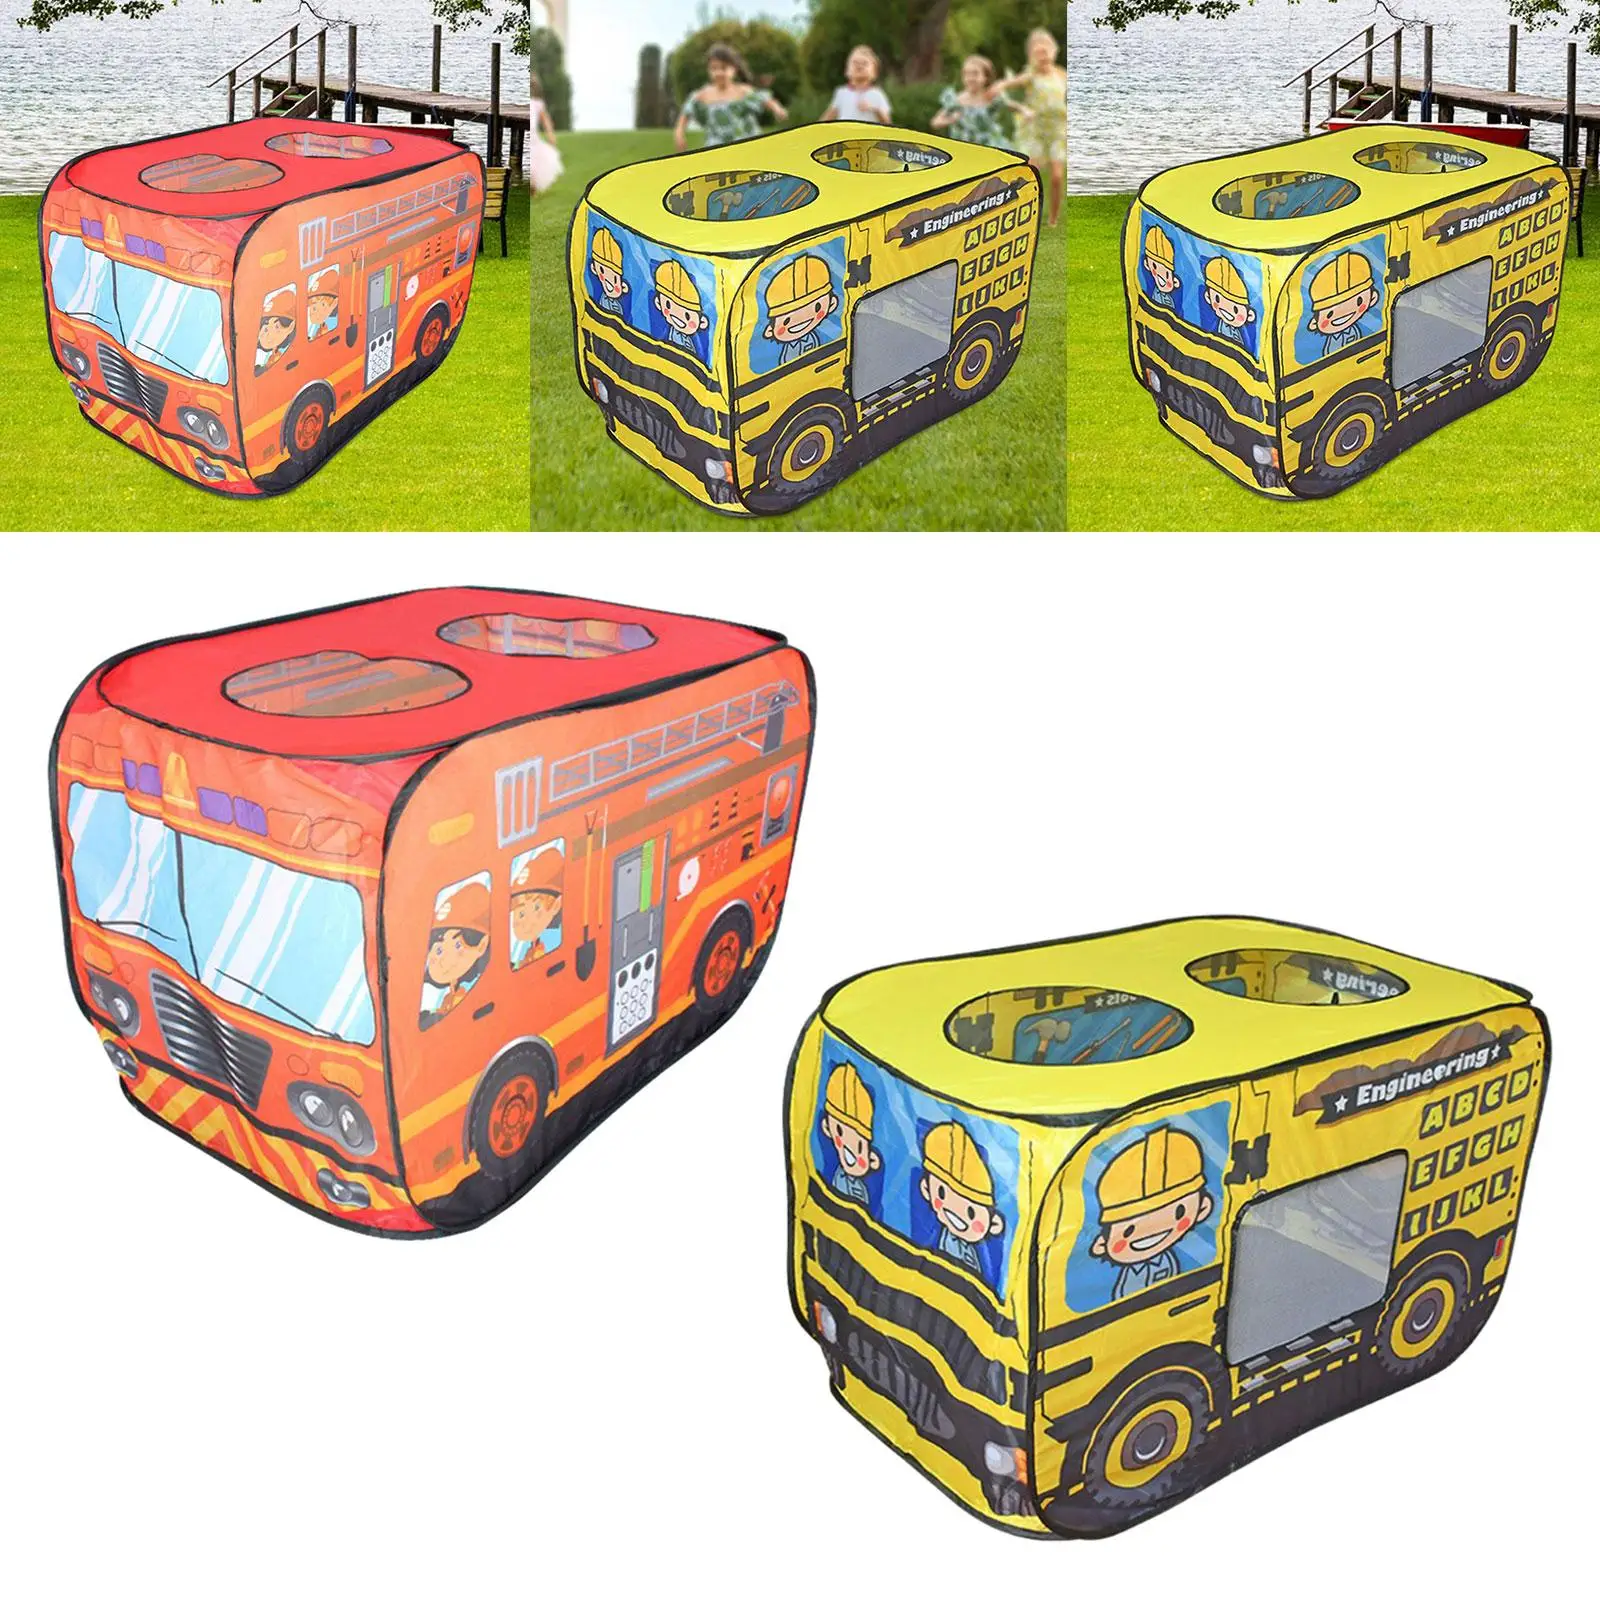 Cartoon Car Play Tent Pool Camping Toy Portable Kids Play House Entertainment for Backyard Outdoor Garden Camping Birthday Gifts